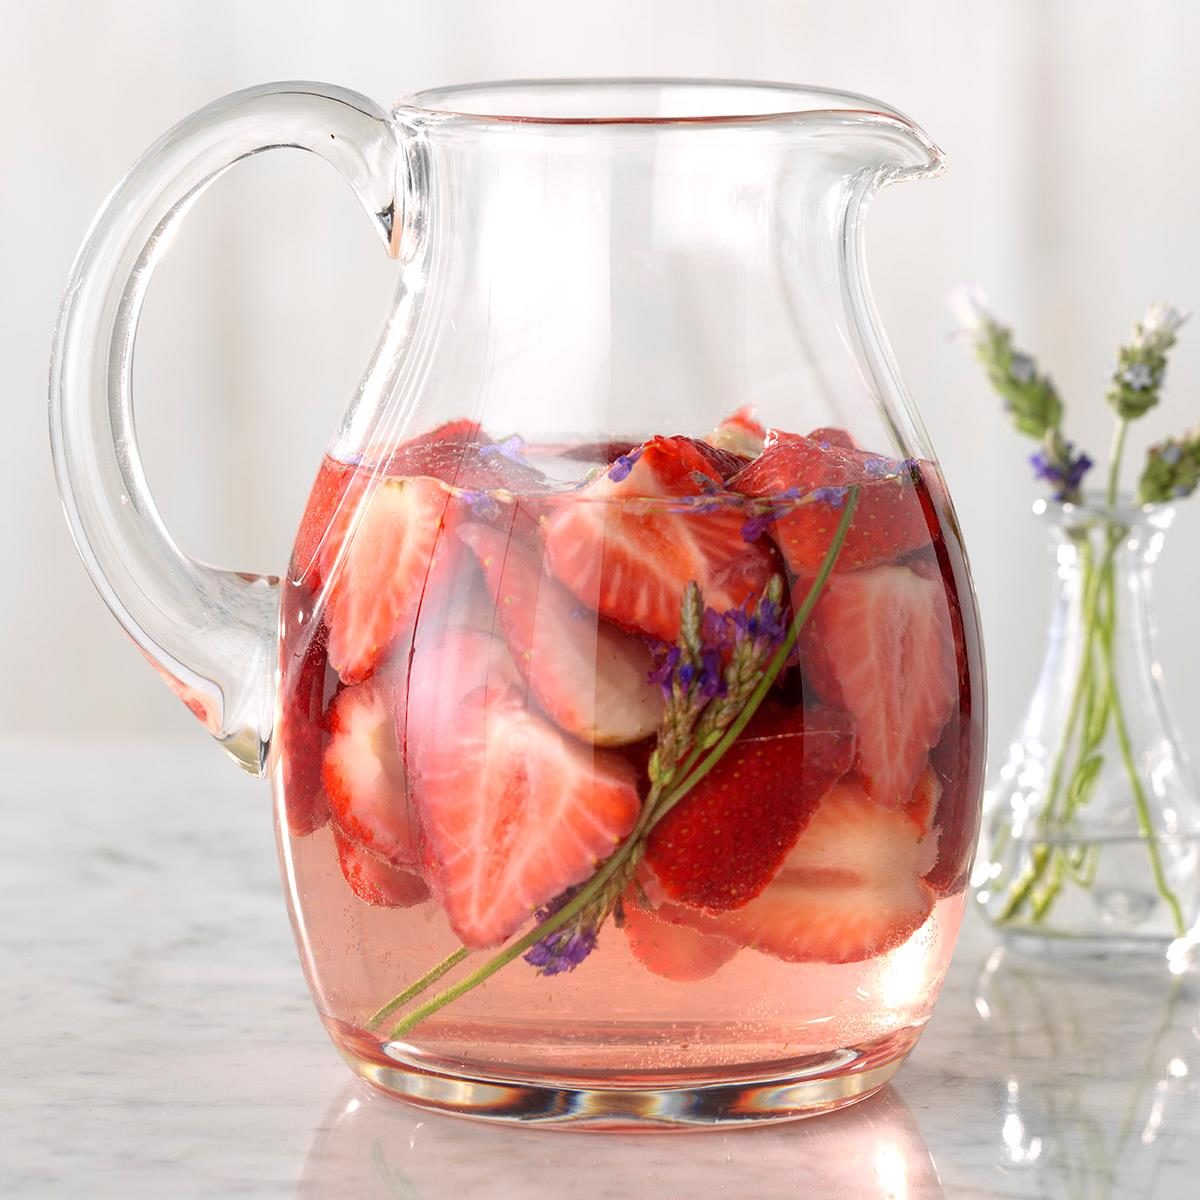 flavored water recipes list｜TikTok Search